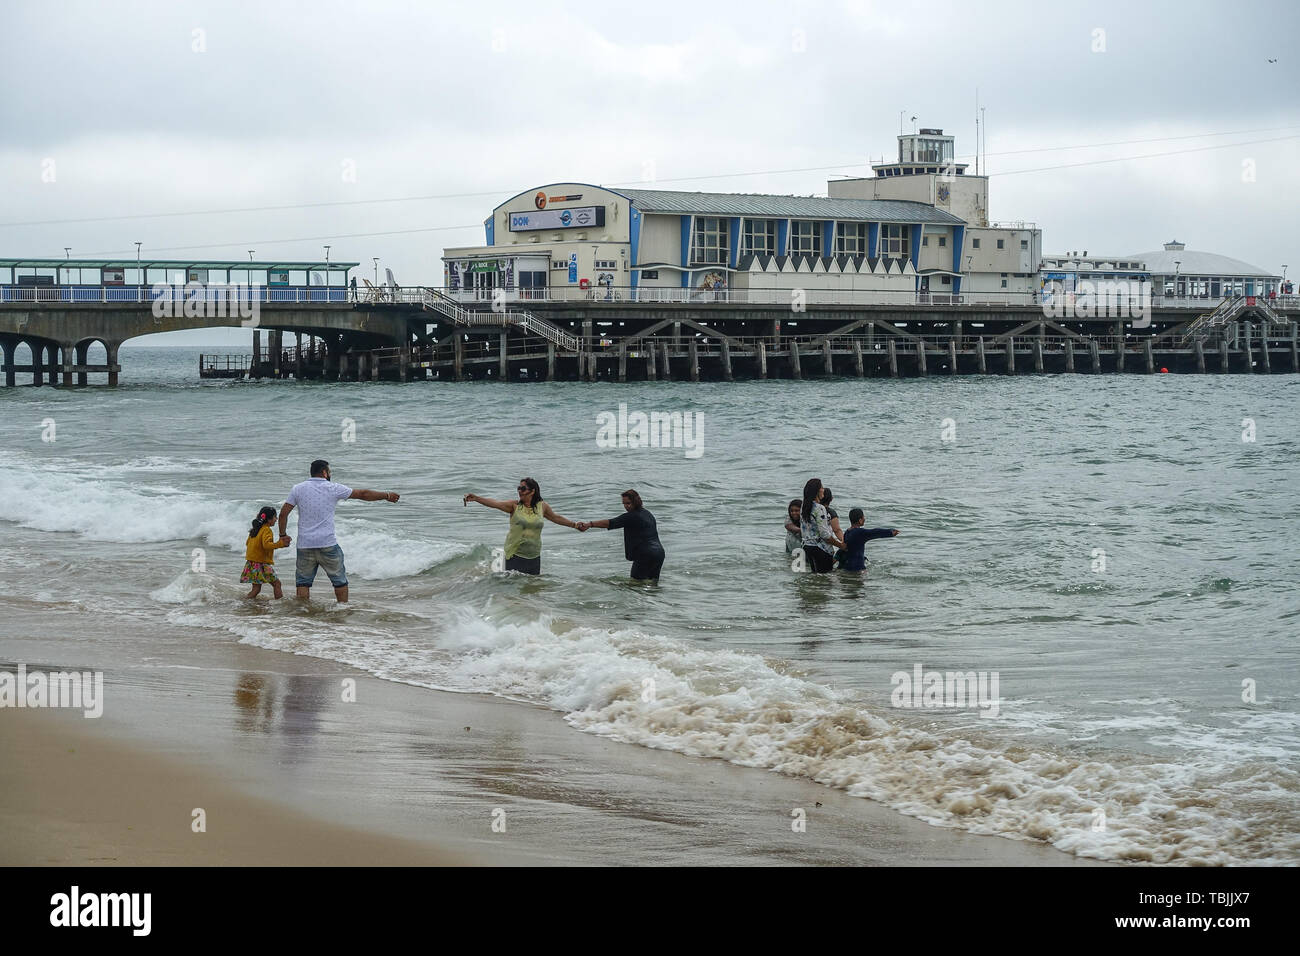 Bournemouth, Dorset, UK, 2nd June 2019. A cool start in the south of England meant that some visitors to the beach were well wrapped up in coats and hoodies. This family took to the sea fully clothed. The forecast was for 29 degrees Celsius but has only reached 20 degrees mid morning with a cool wind. Credit: Mick Flynn/Alamy Live News Stock Photo